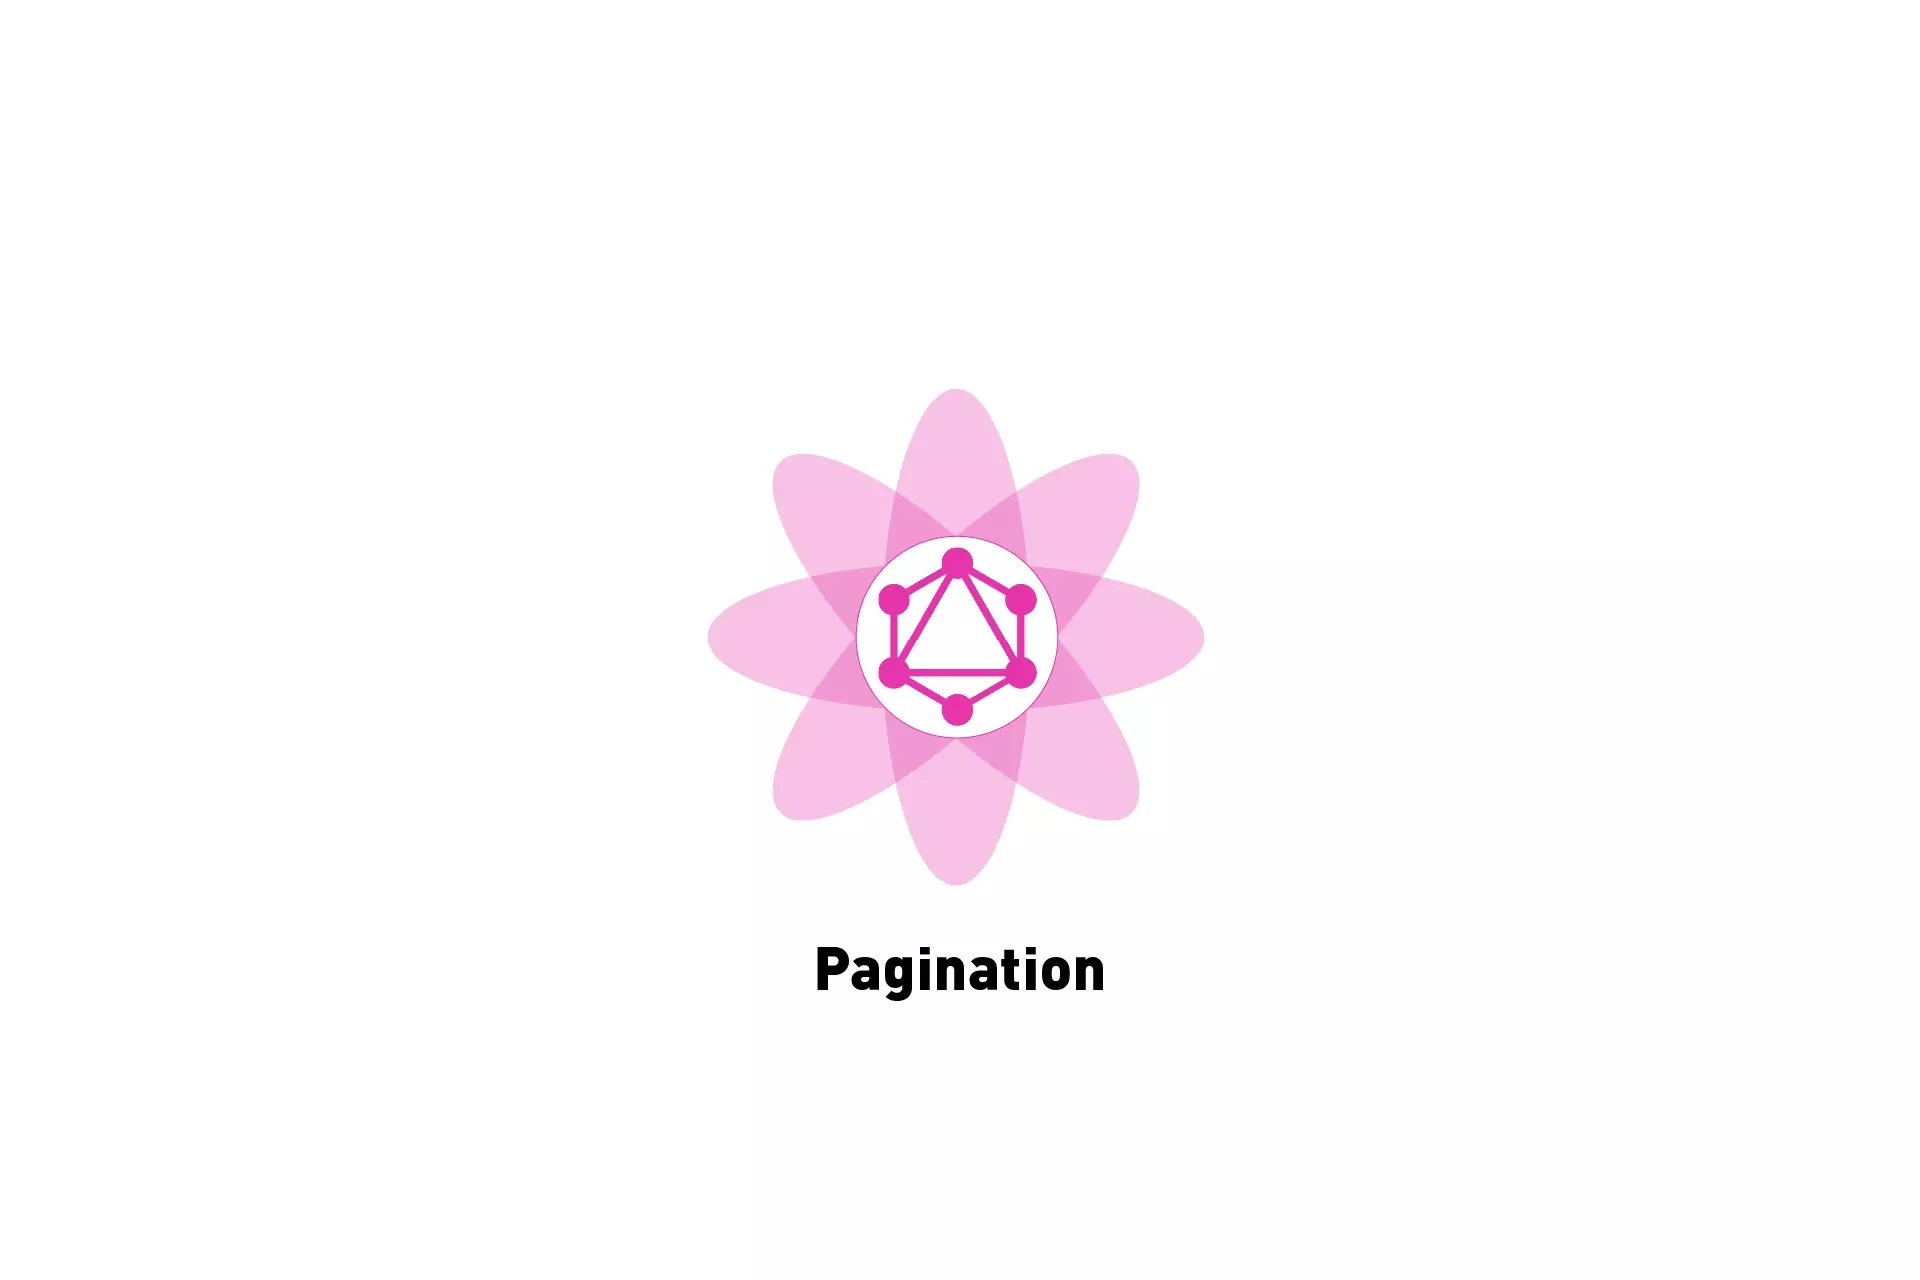 A flower that represents GraphQL, beneath it sits the text "Pagination".